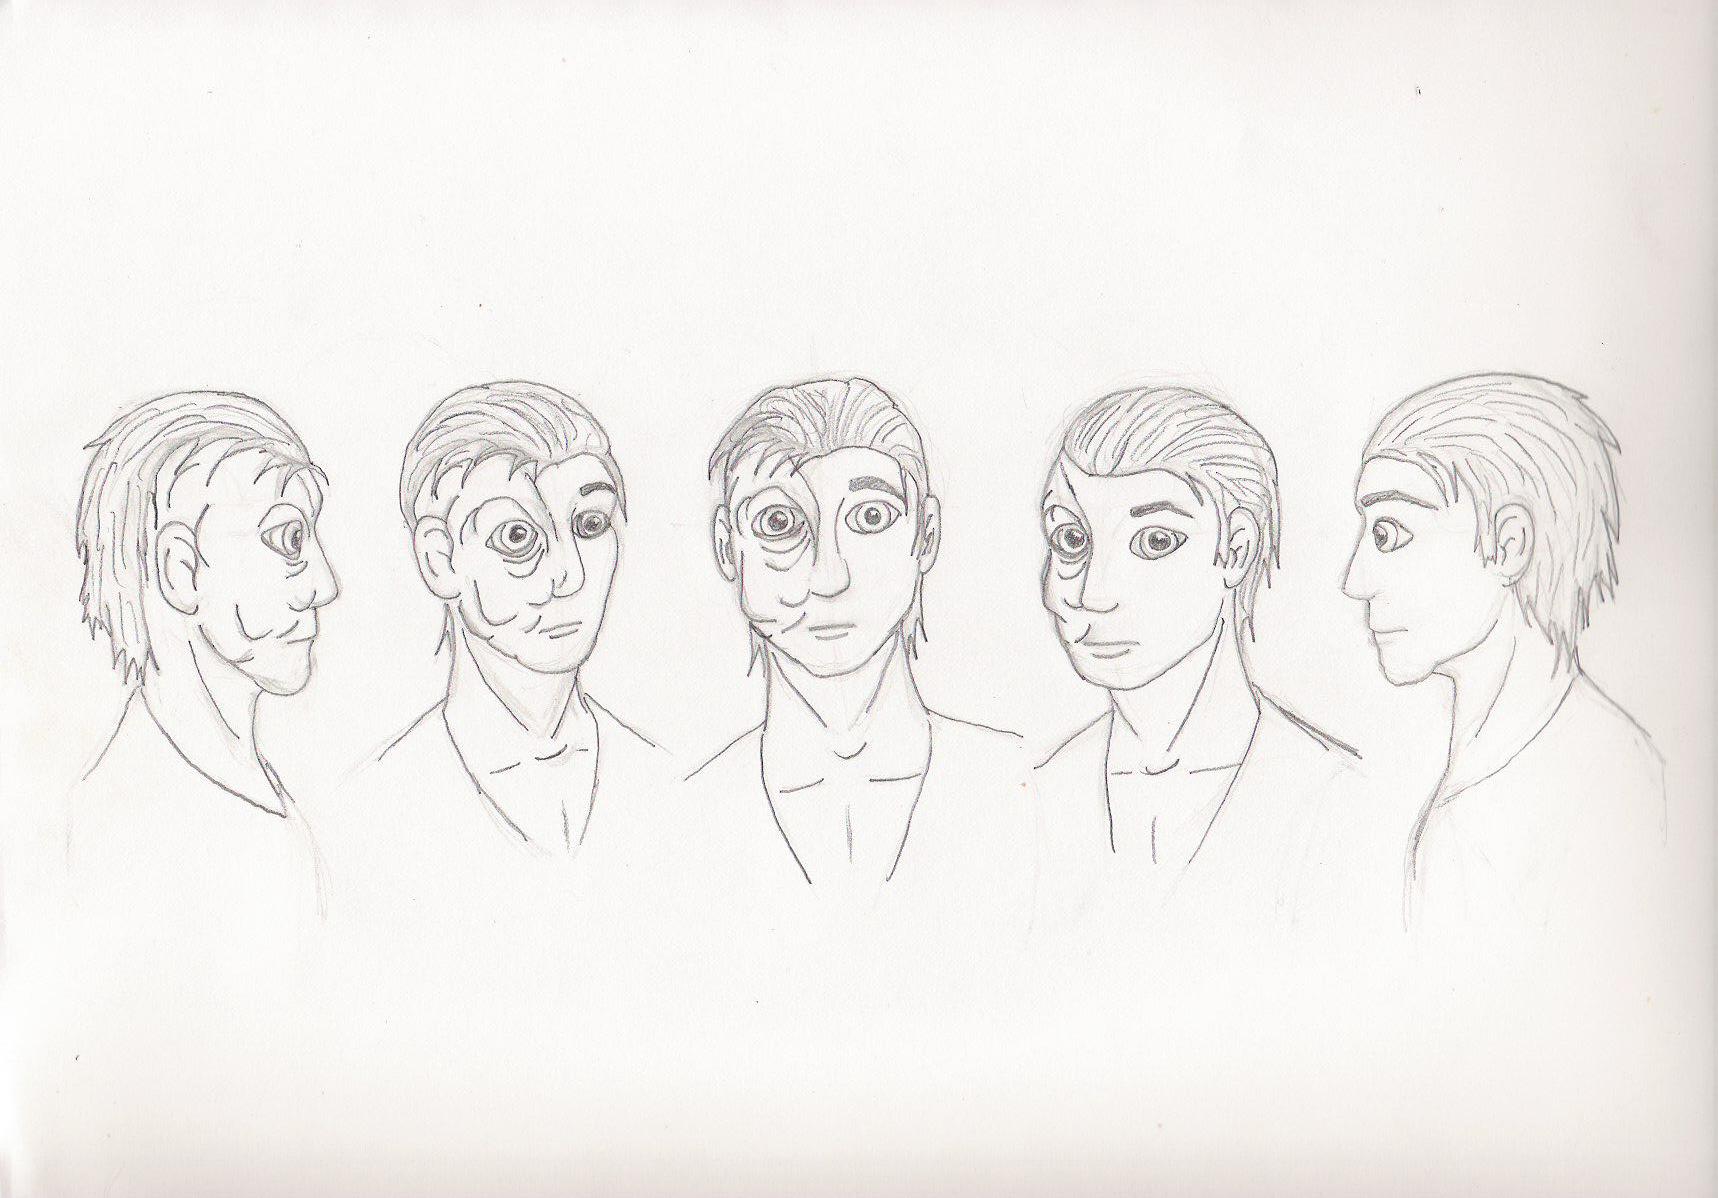 Facial study of the Phantom by Spoofmaster